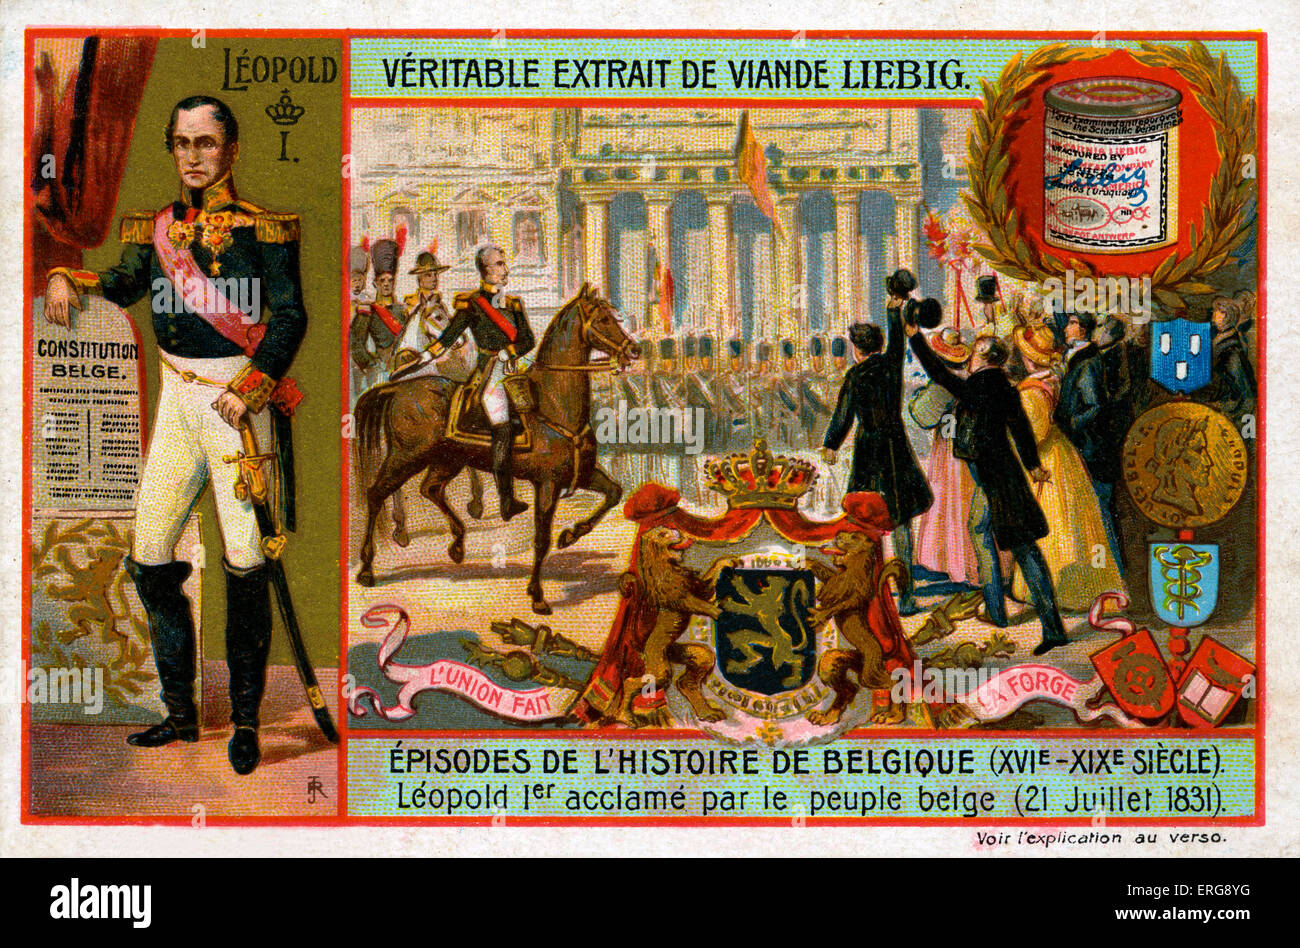 Leopold I (1790-1864), the first King of Belgium, saluted by the people of Belgium on his accession to the throne 21 July 1831. Stock Photo